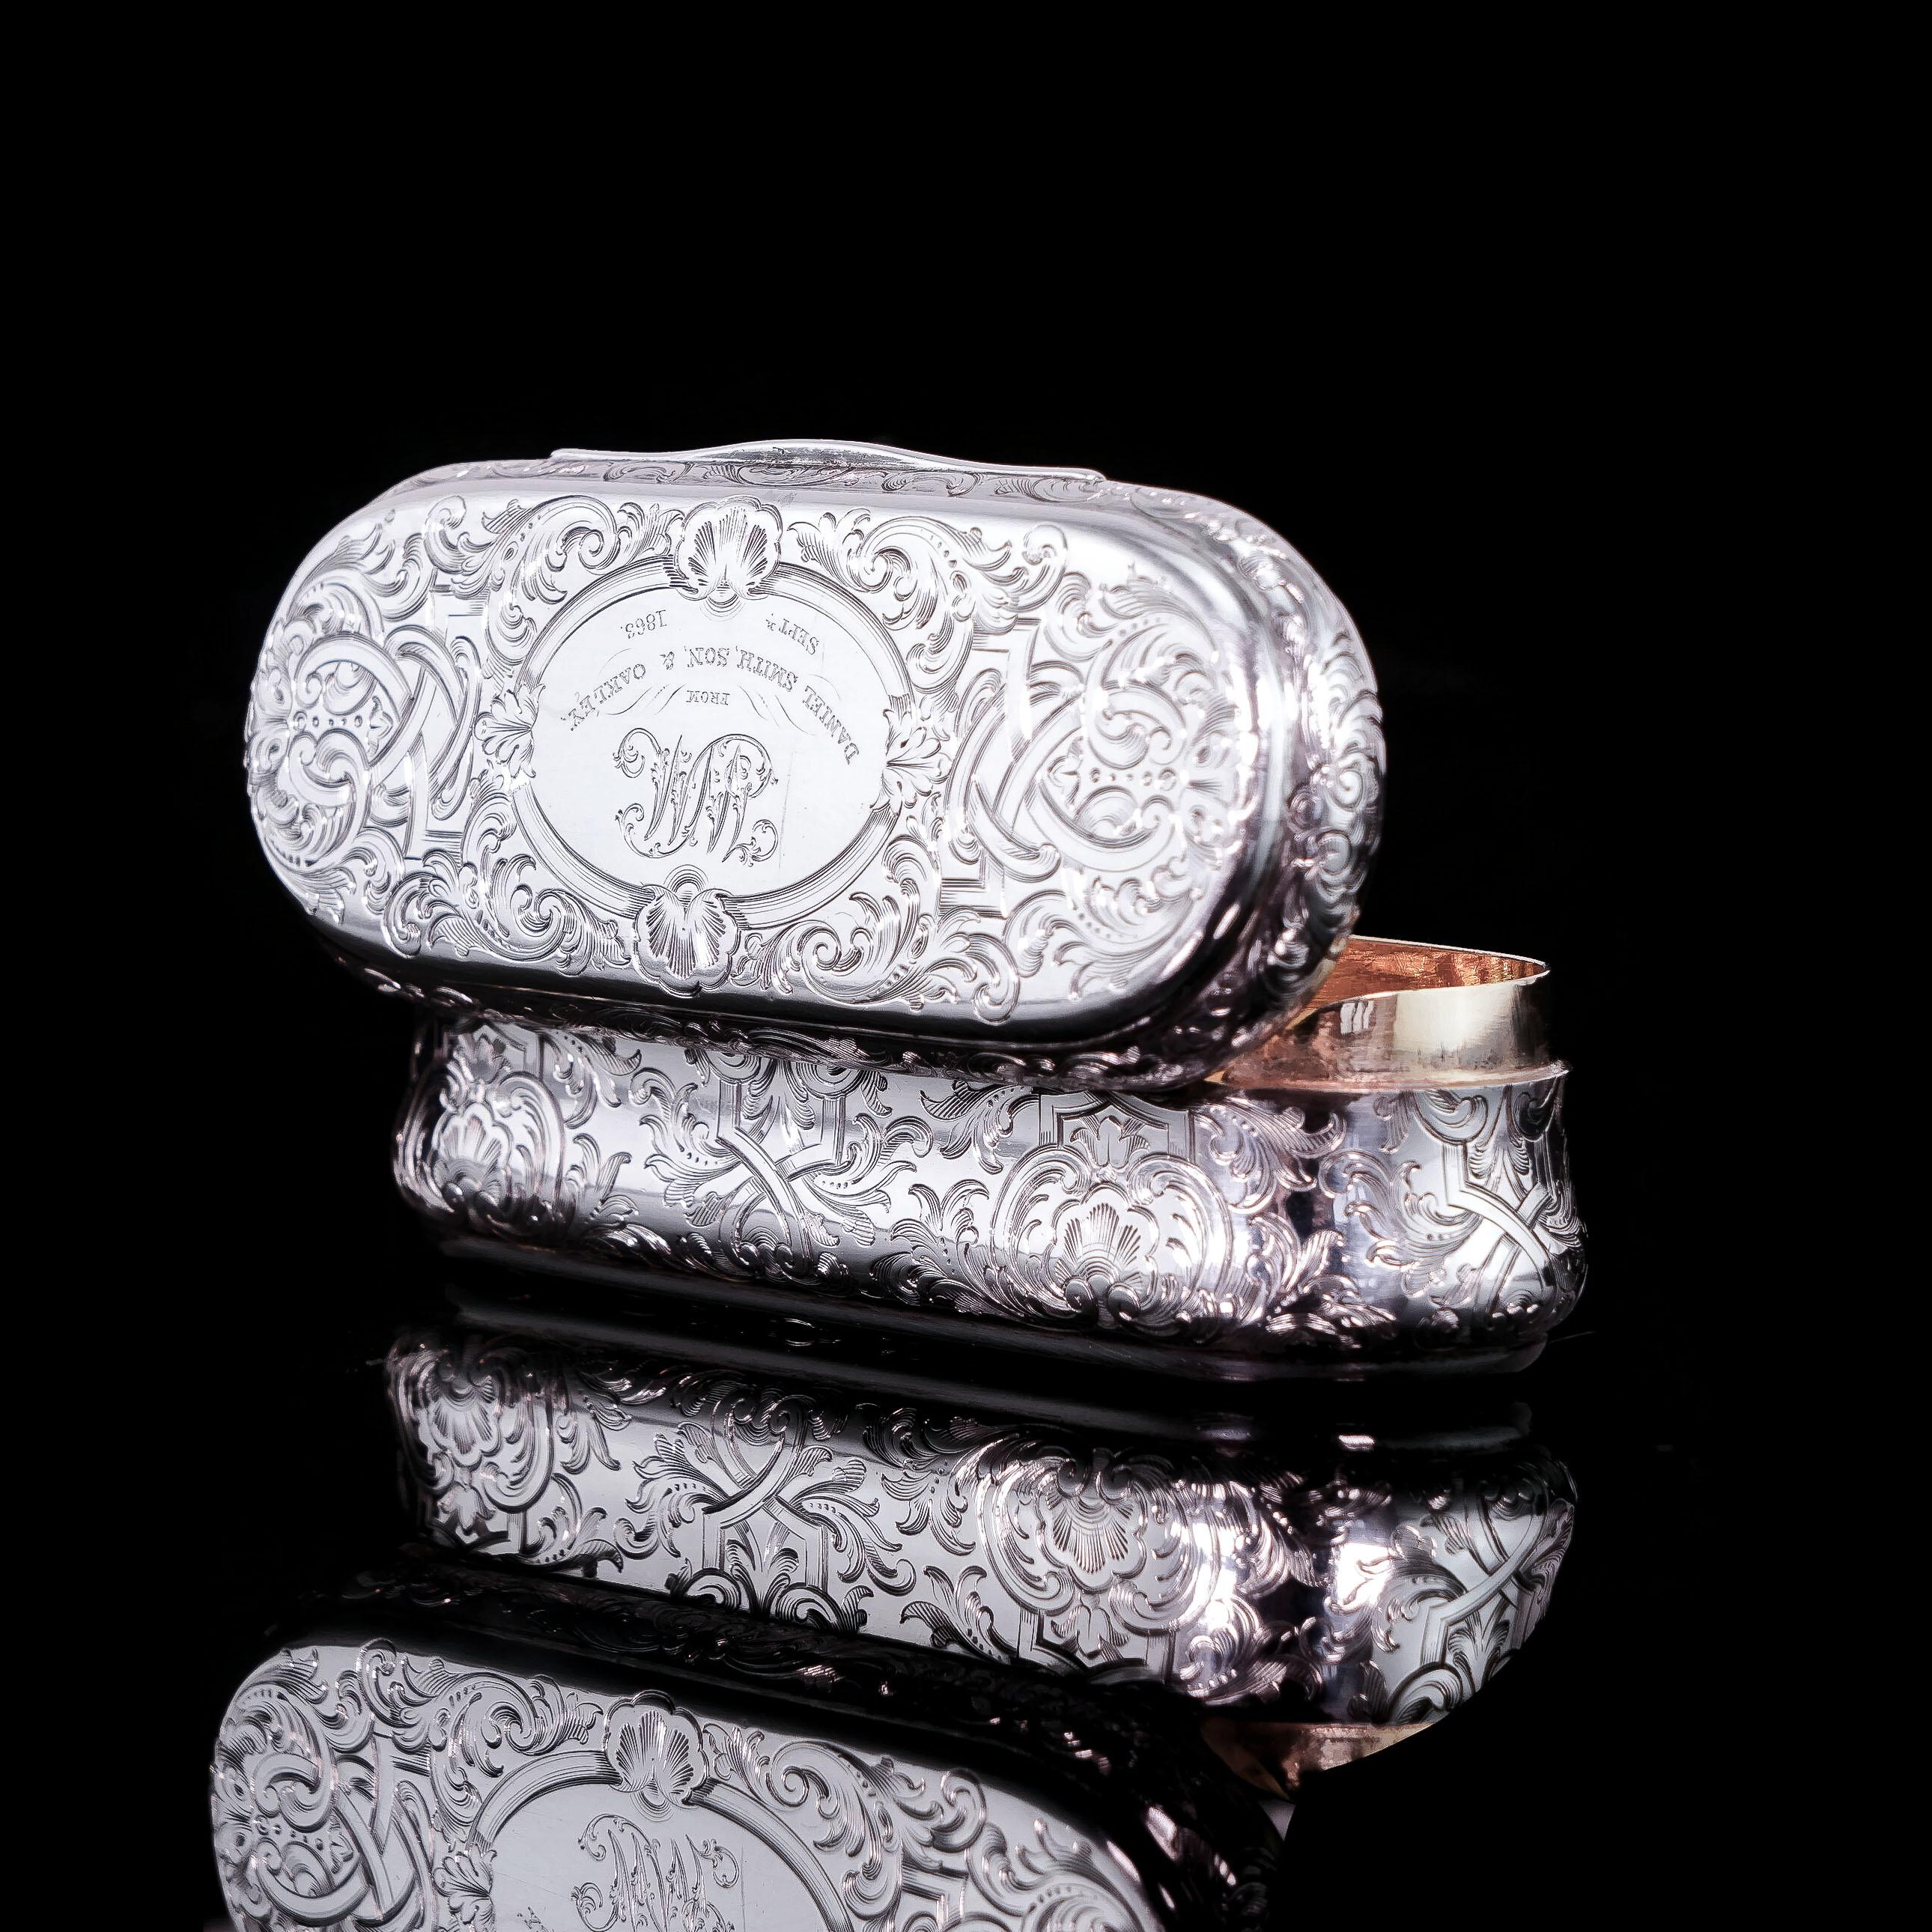 Victorian Antique Silver Snuff Box Oblong Shape - Charles Rawlings & William Summers 1849 For Sale